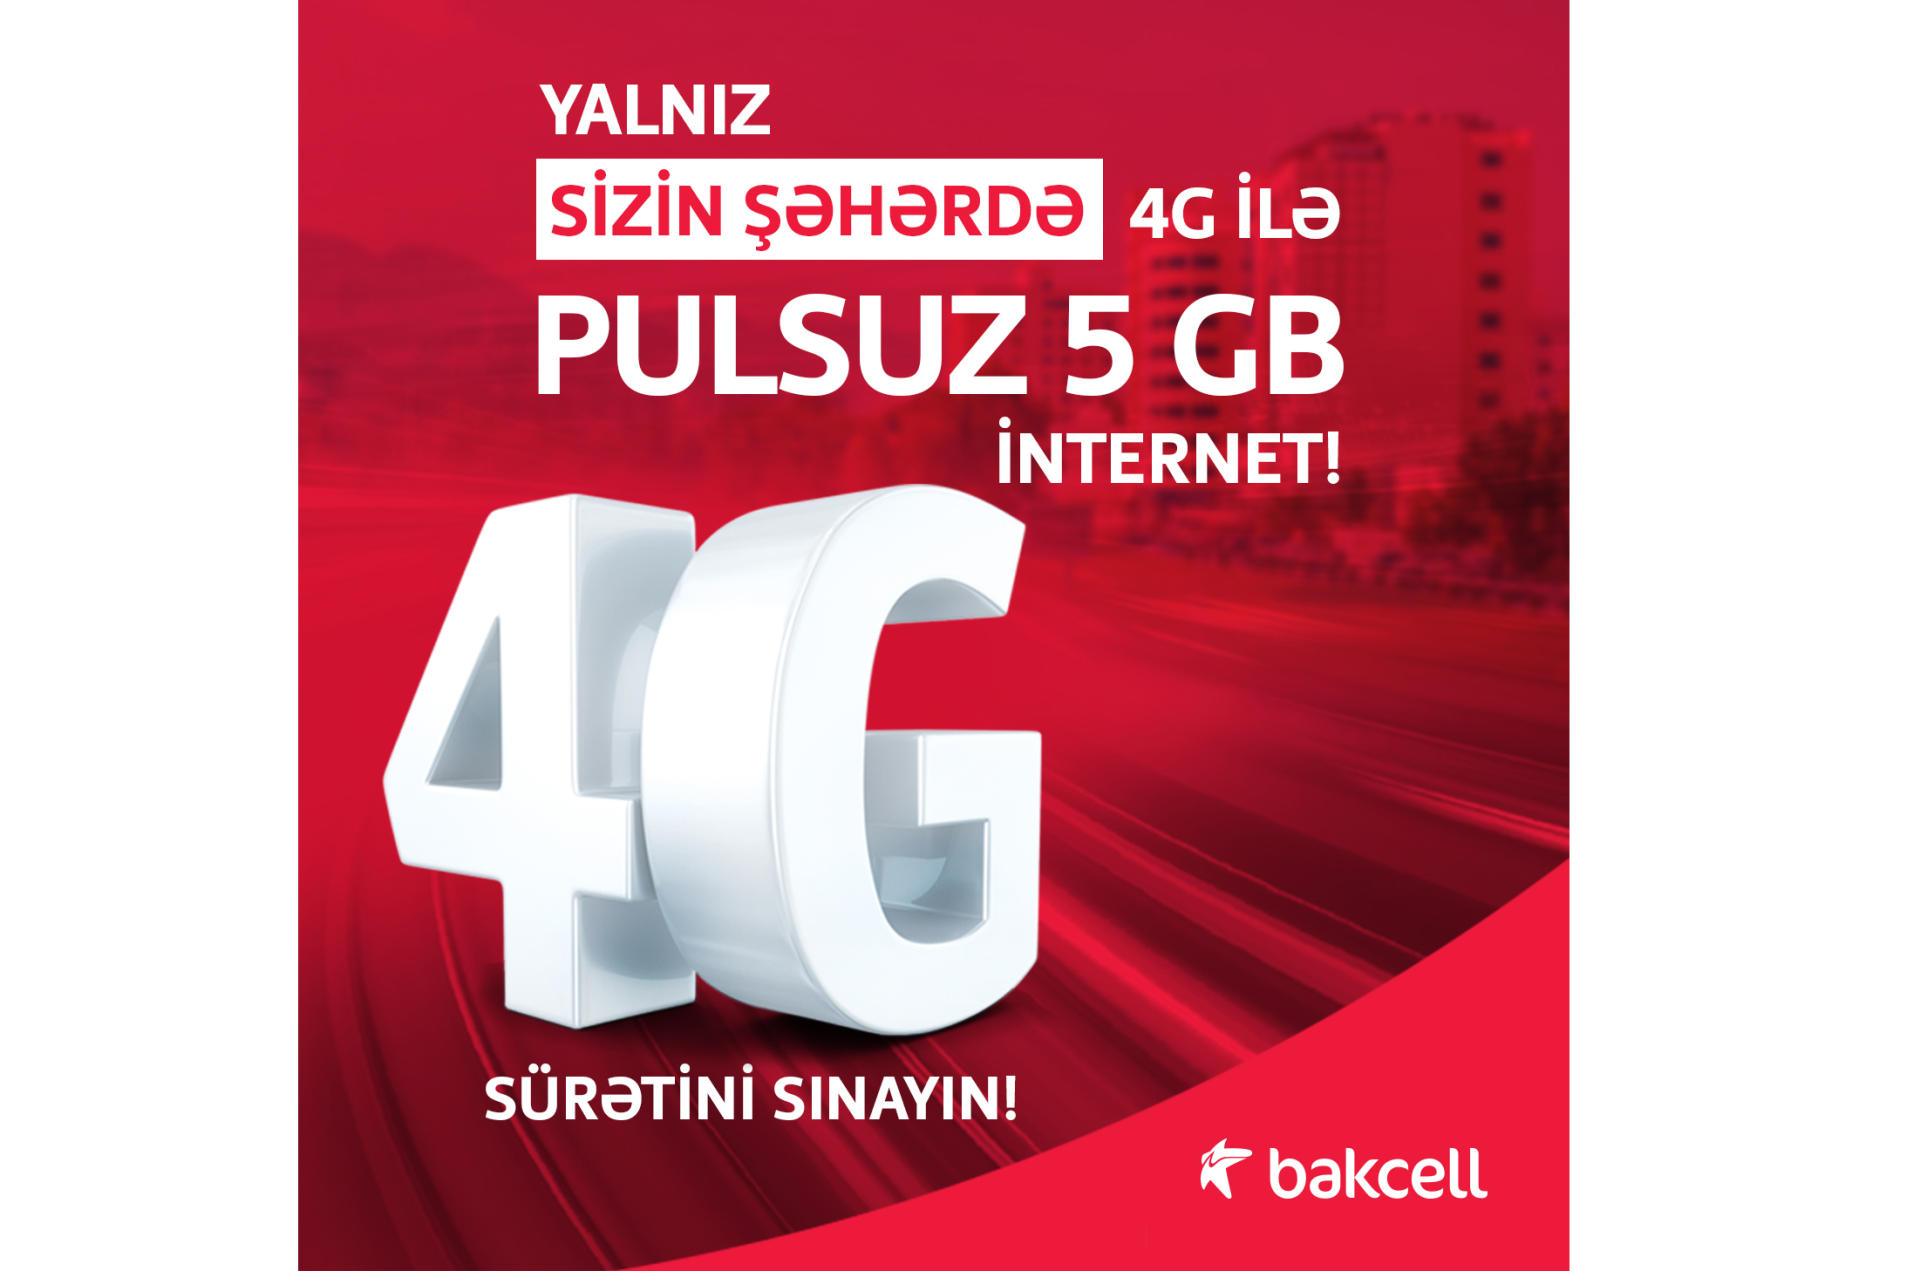 Residents of 12 more regions of Azerbaijan to receive FREE 4G internet from Bakcell